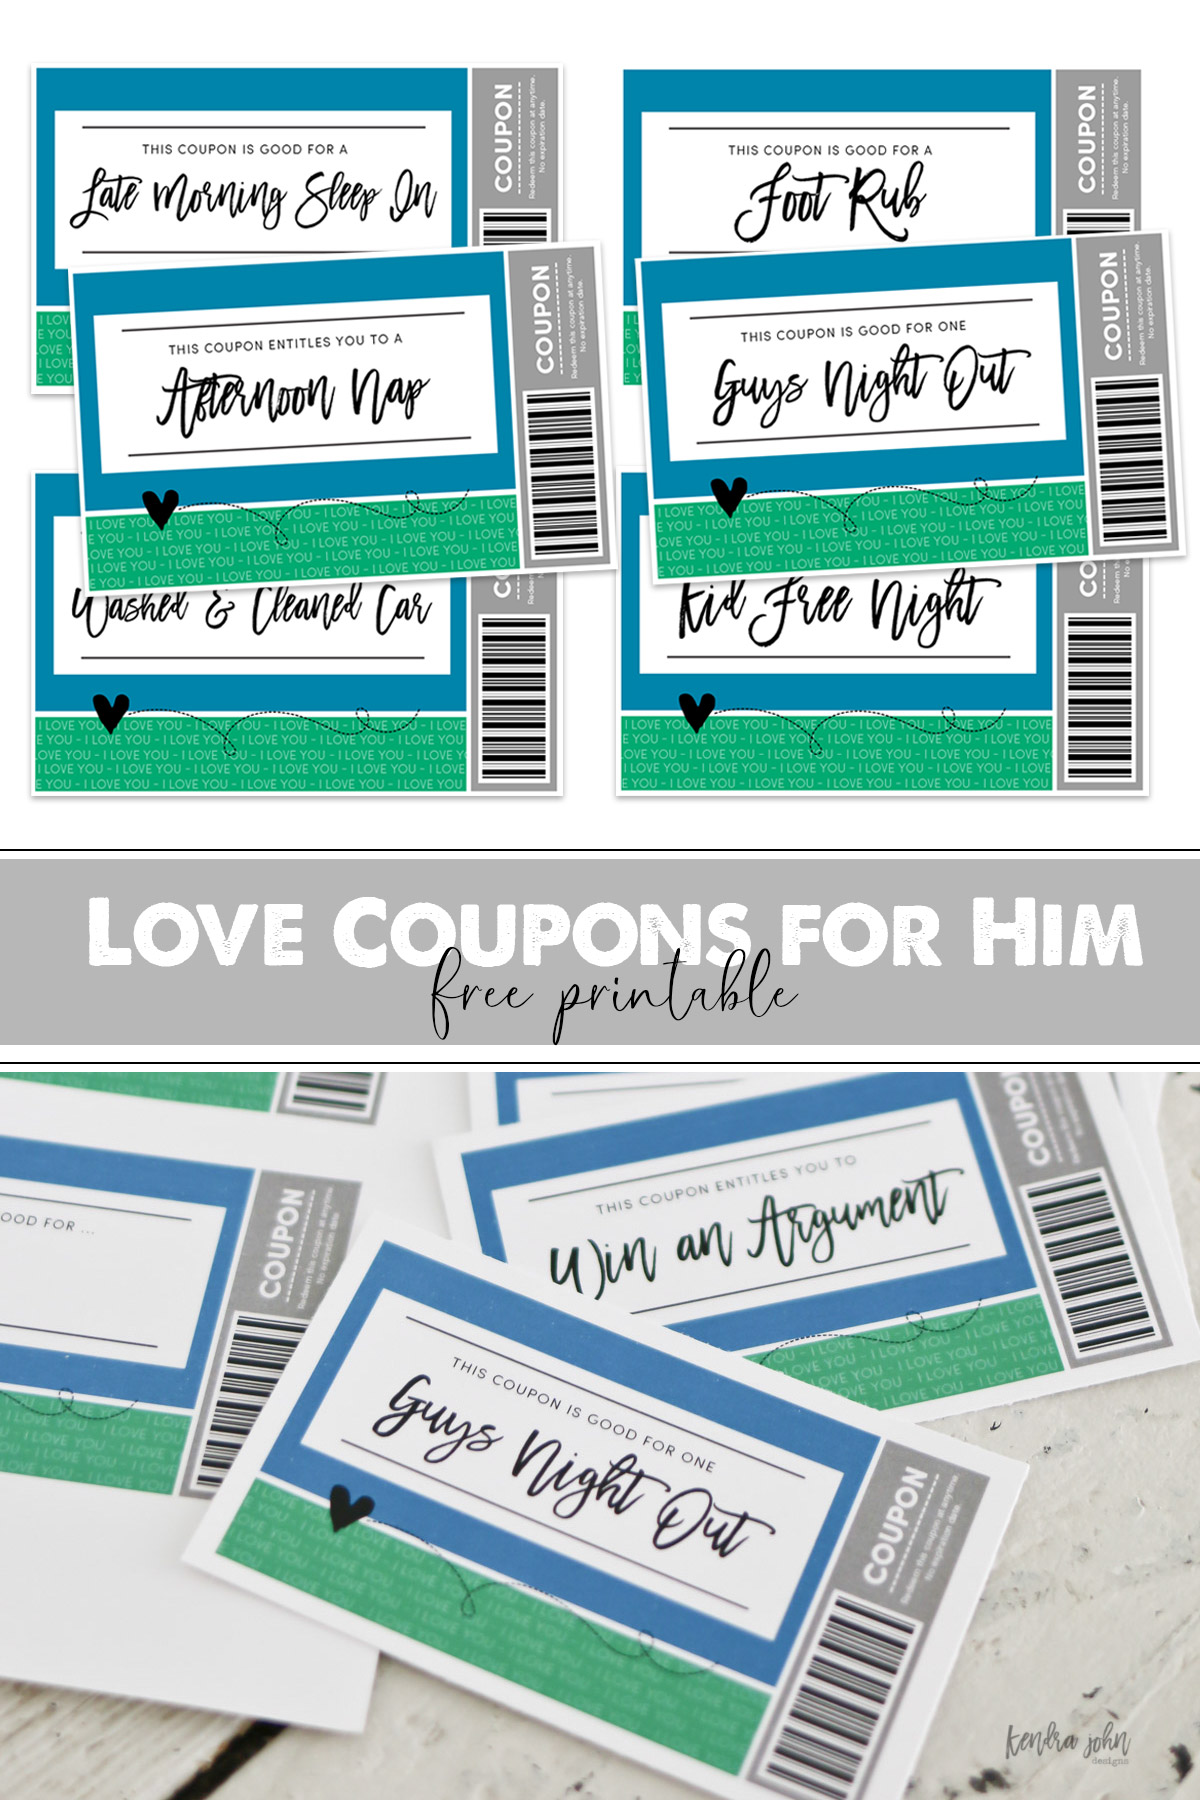 Printable Love Coupons for Husband or Boyfriends. Guys night out, Kid Free Night, Washed and cleaned car plus more.